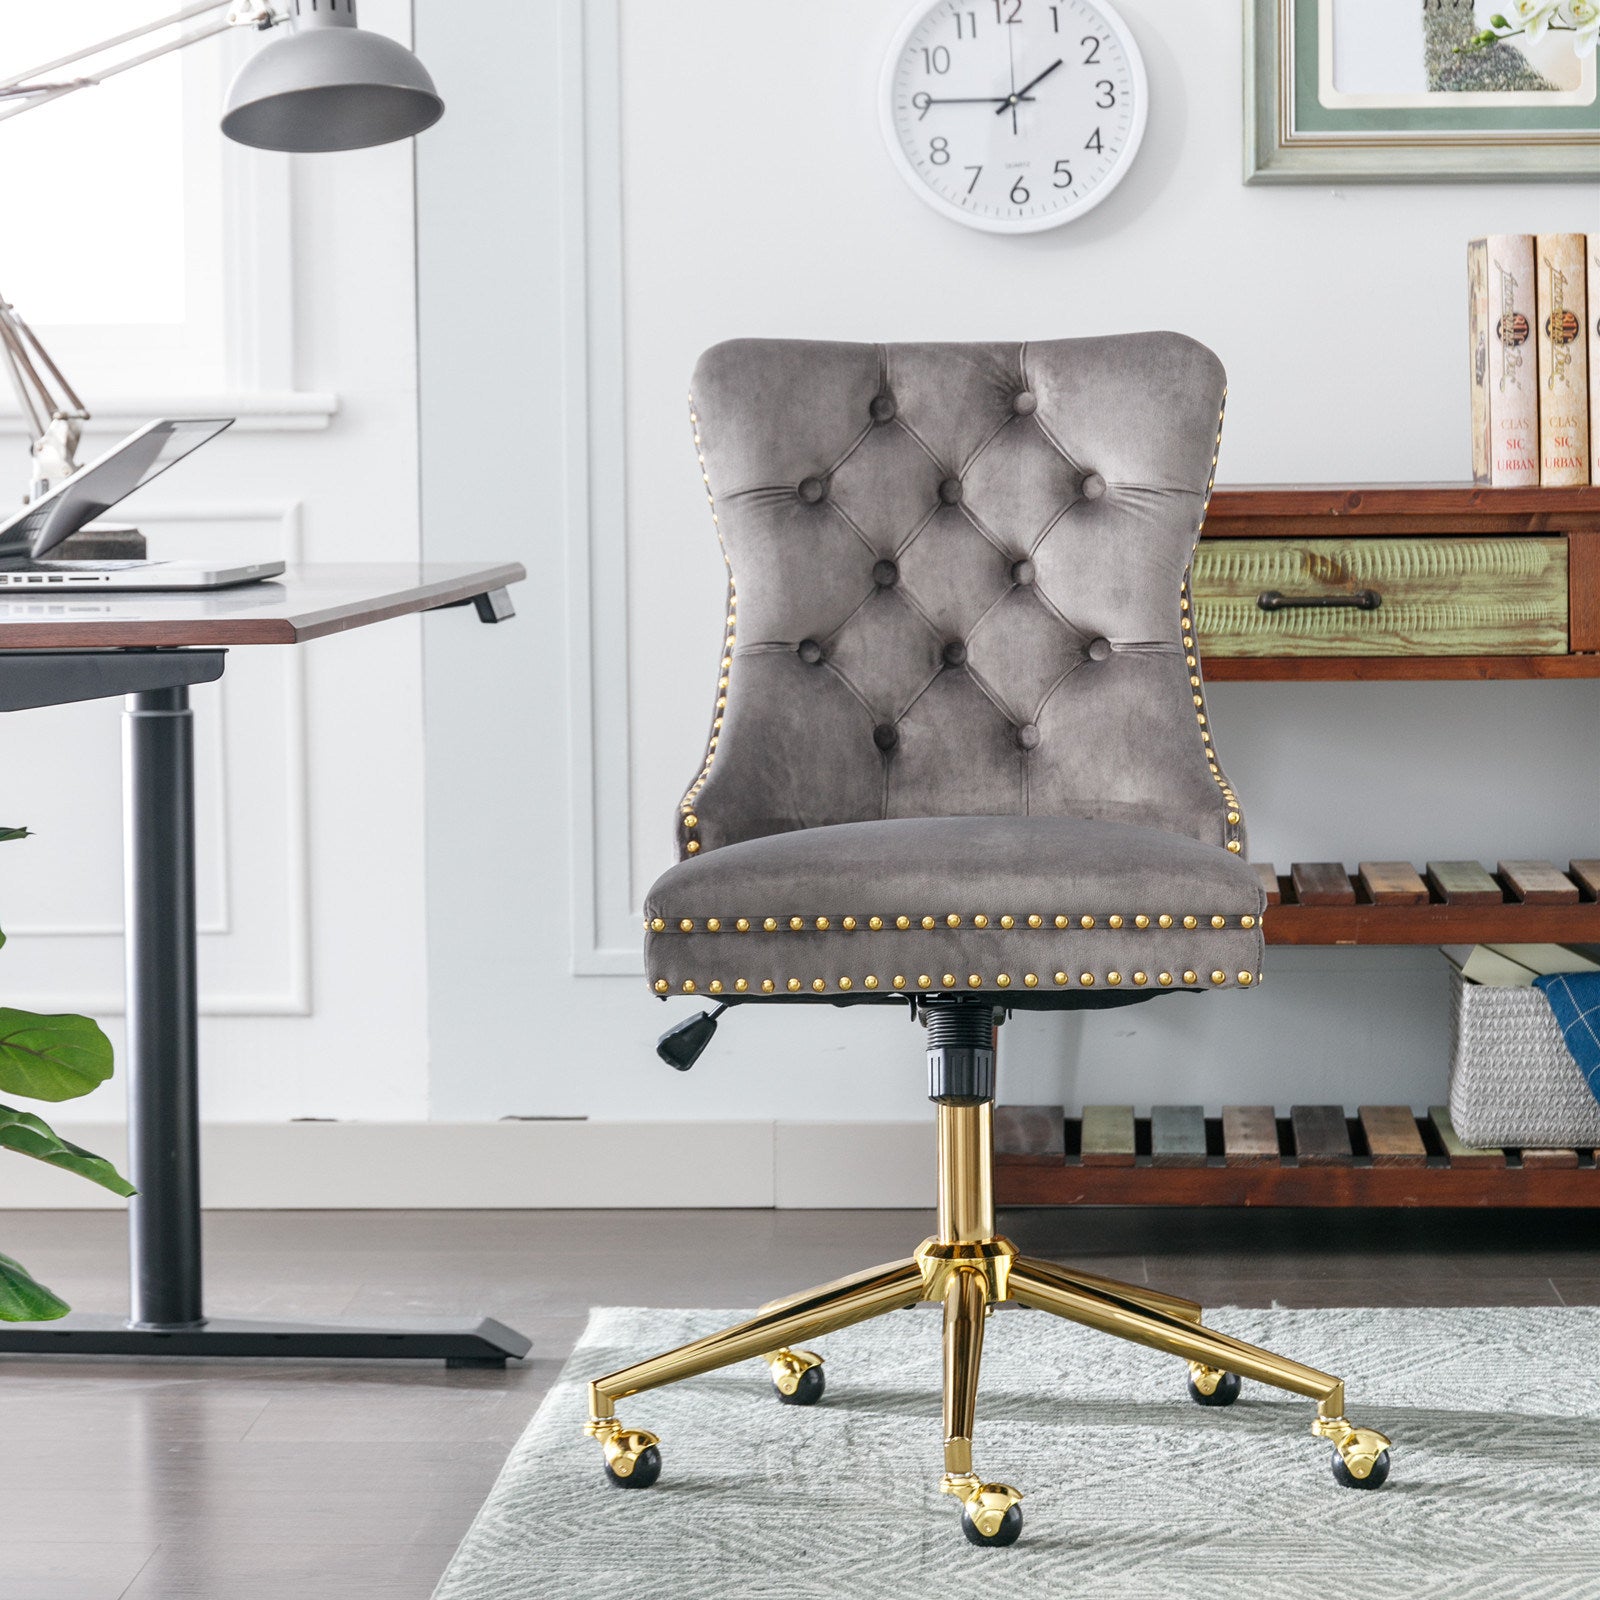 Furniture Office Chair,Velvet Upholstered Tufted Button Home Office Chair with Golden Metal Base,Adjustable Desk Chair Swivel Office Chair (Gray)